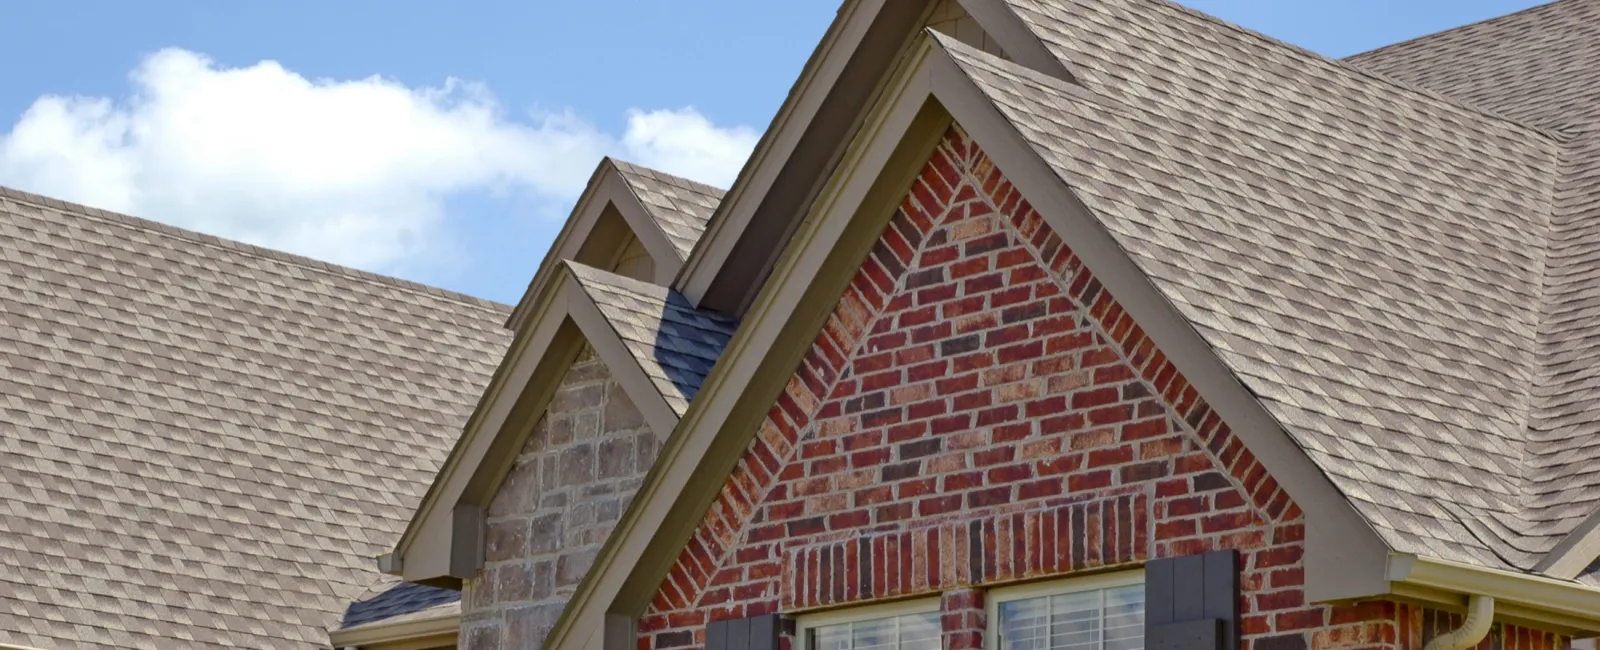 Modern roof styles are all around you. Check out these style from the Atlanta area.